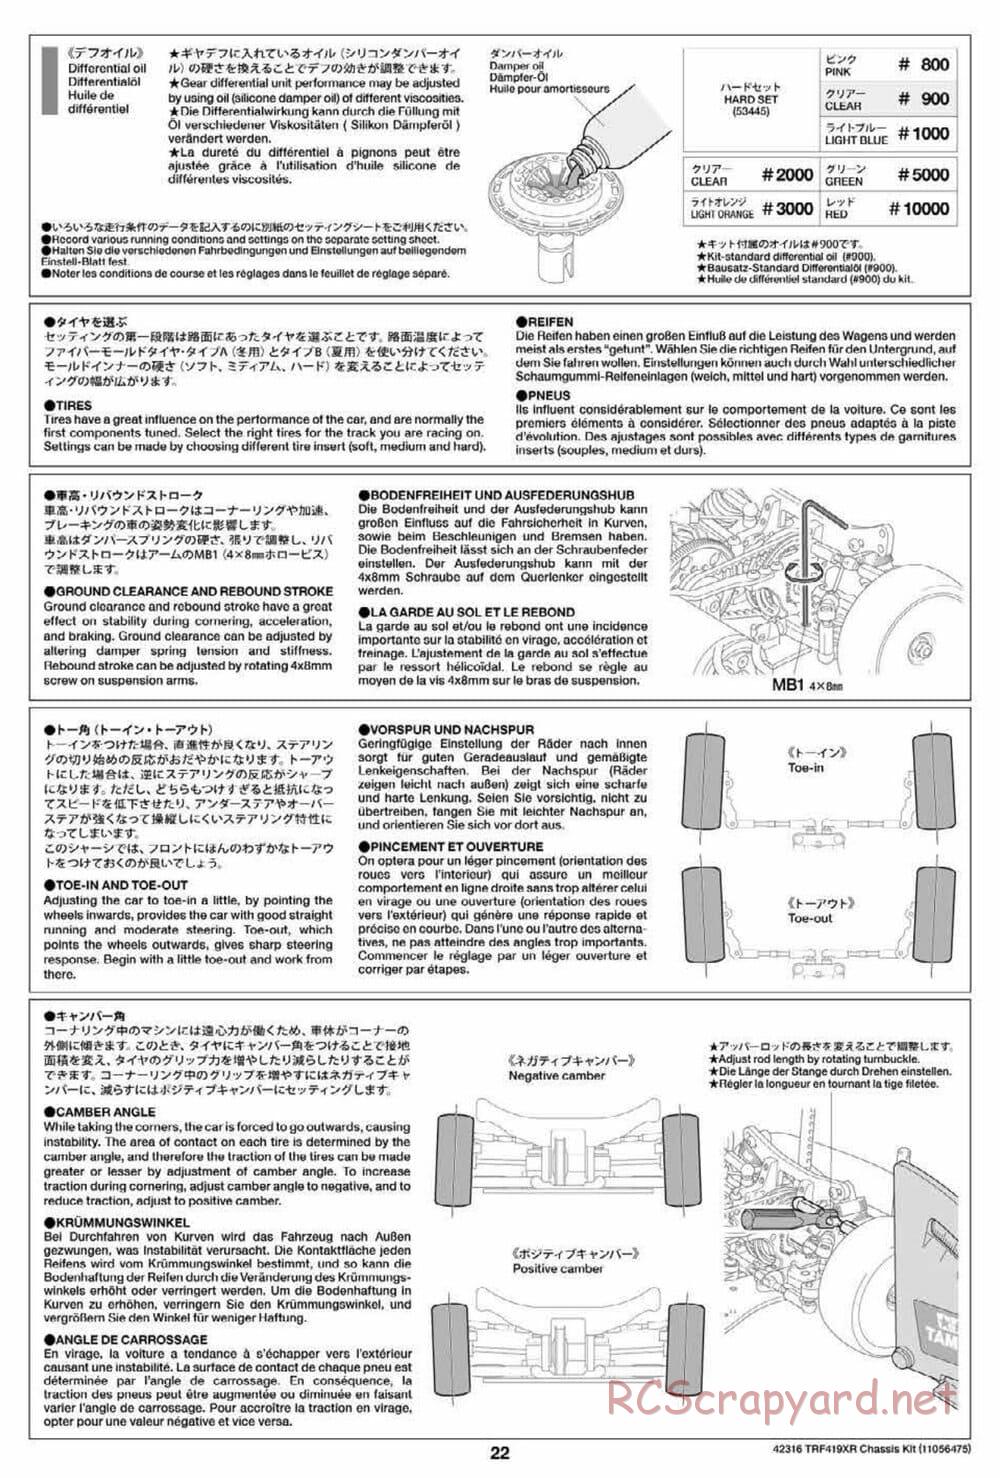 Tamiya - TRF419XR Chassis - Manual - Page 22